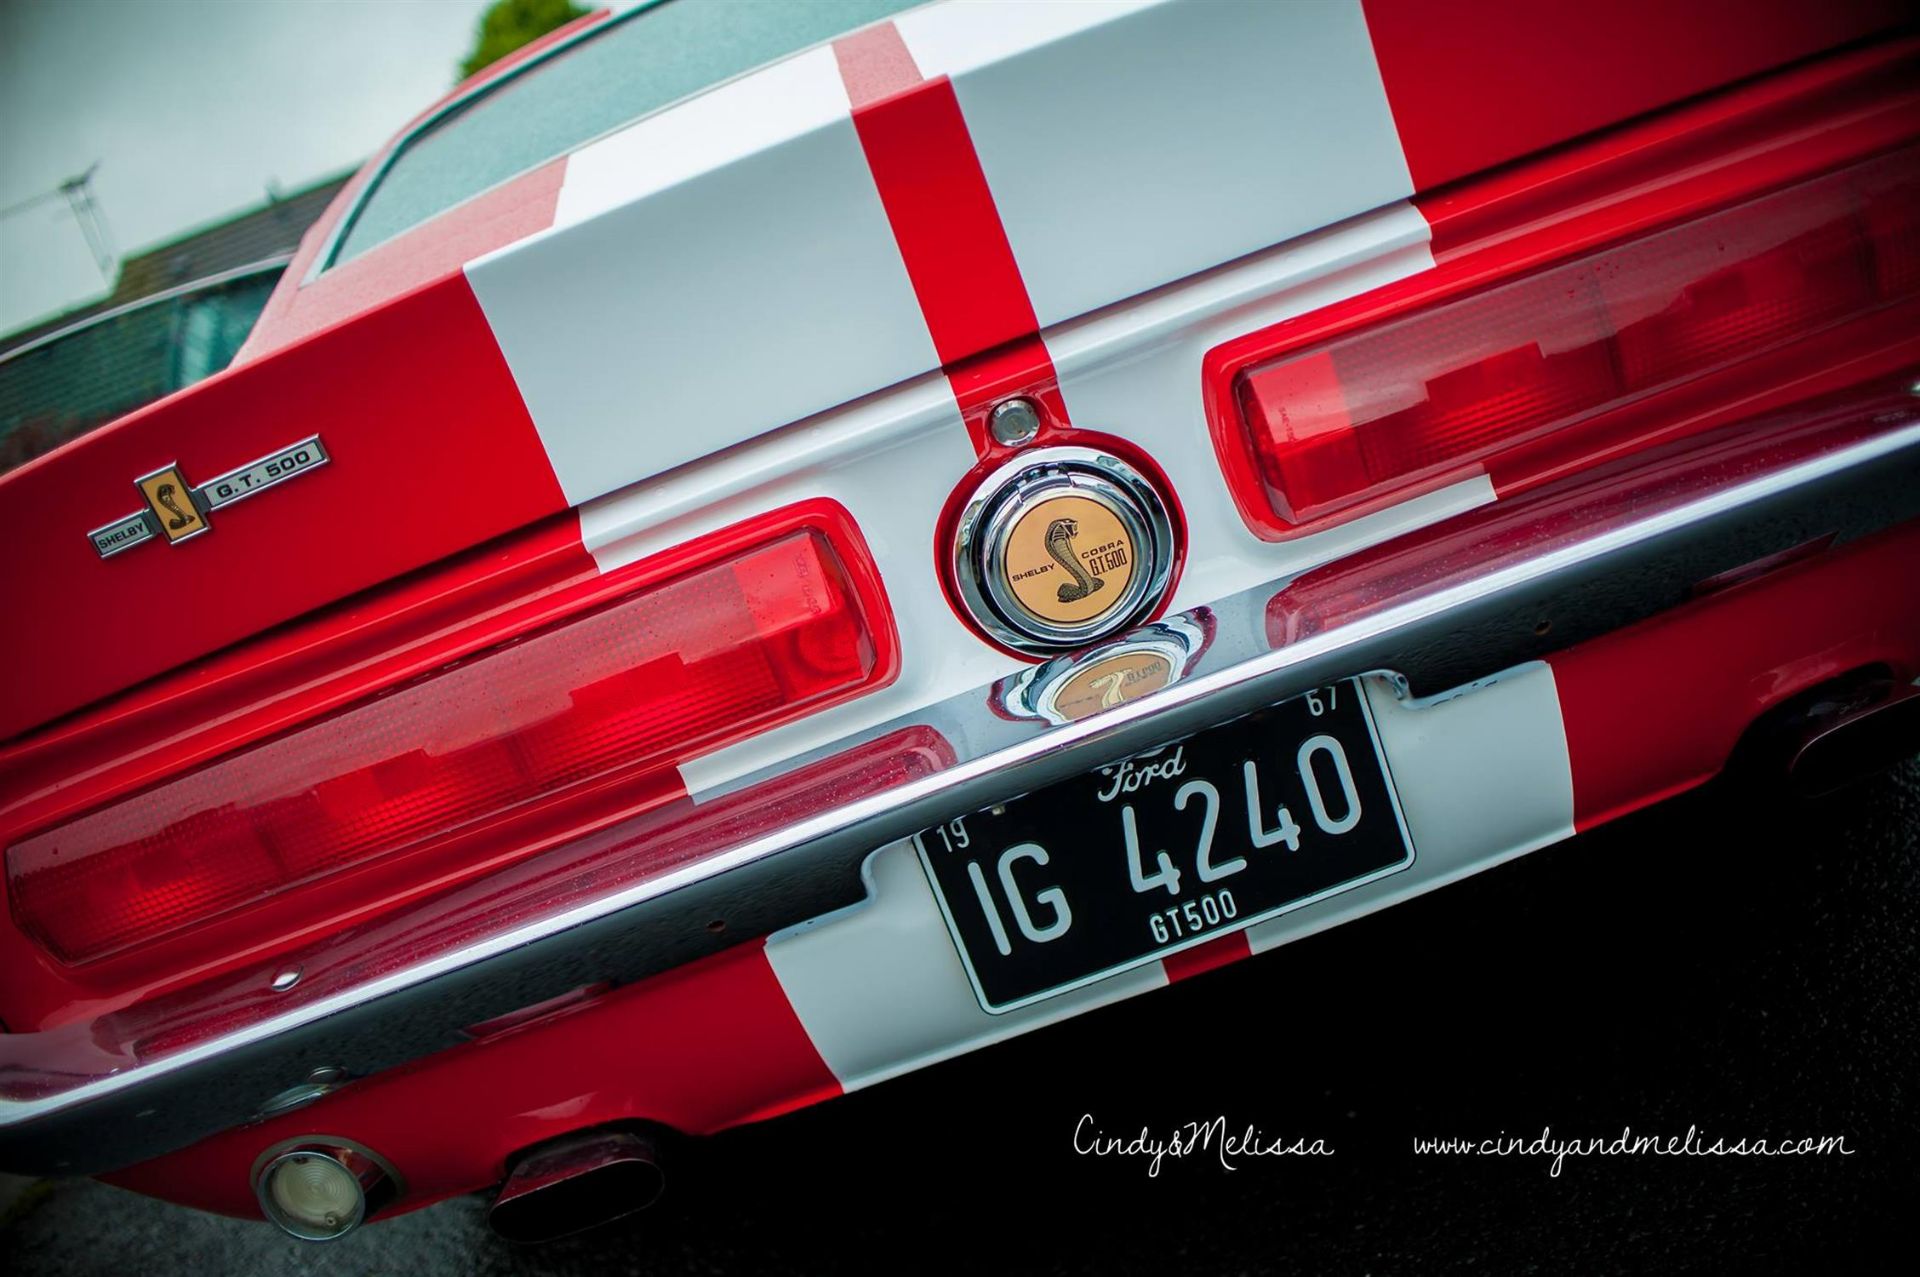 1967 Ford Mustang GT500 Replica - Image 5 of 8